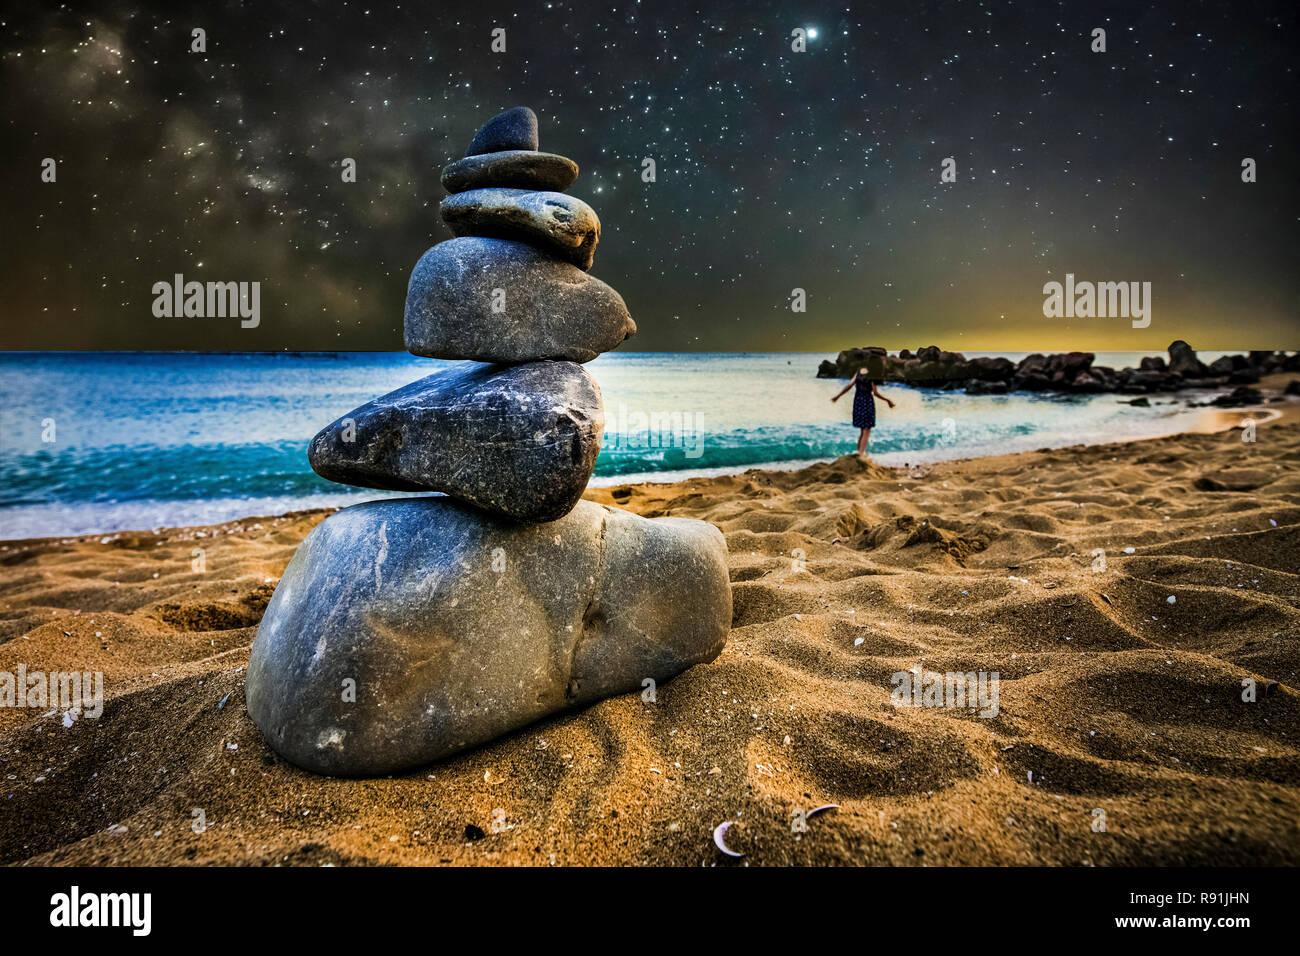 stone cairn on the sand beach, on the background  of night star landscape, concept of balance Stock Photo